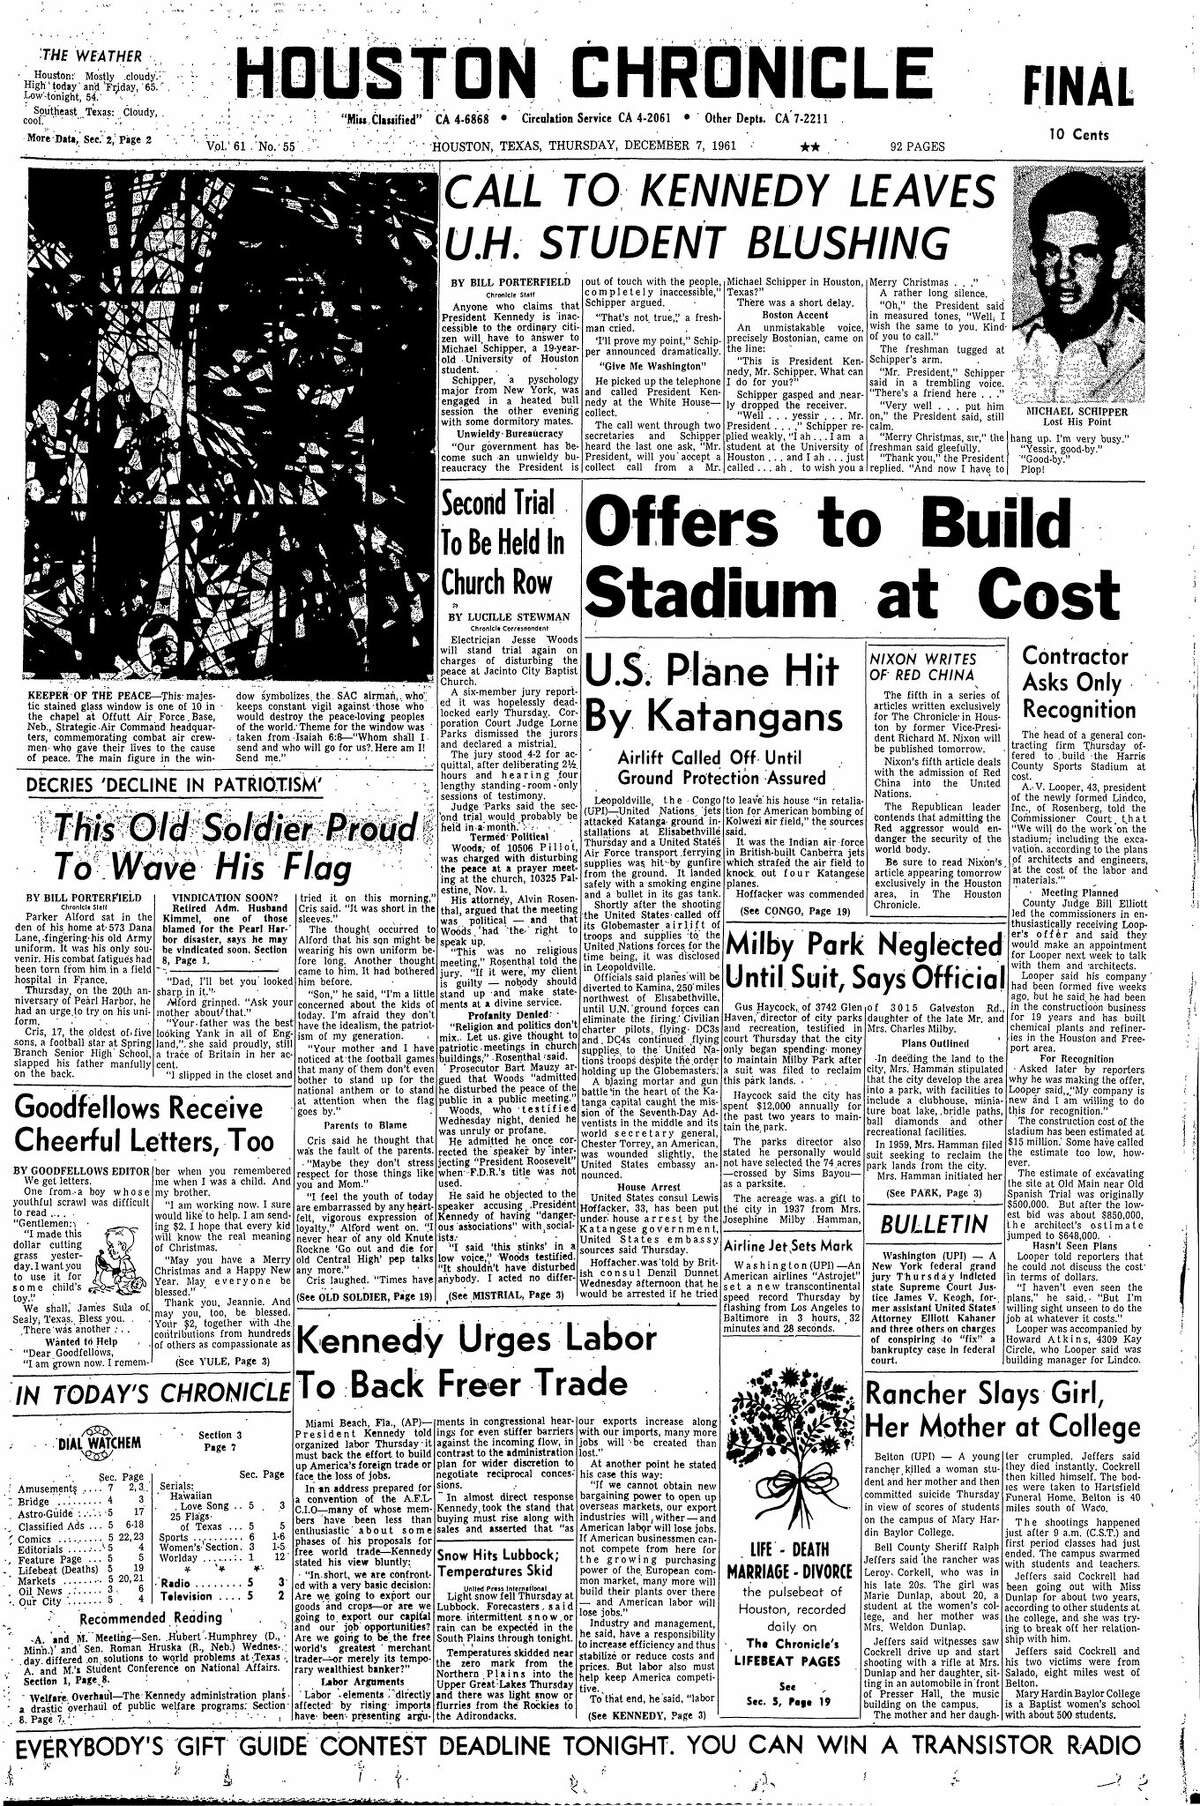 Houston Chronicle front page from Dec. 7, 1961.